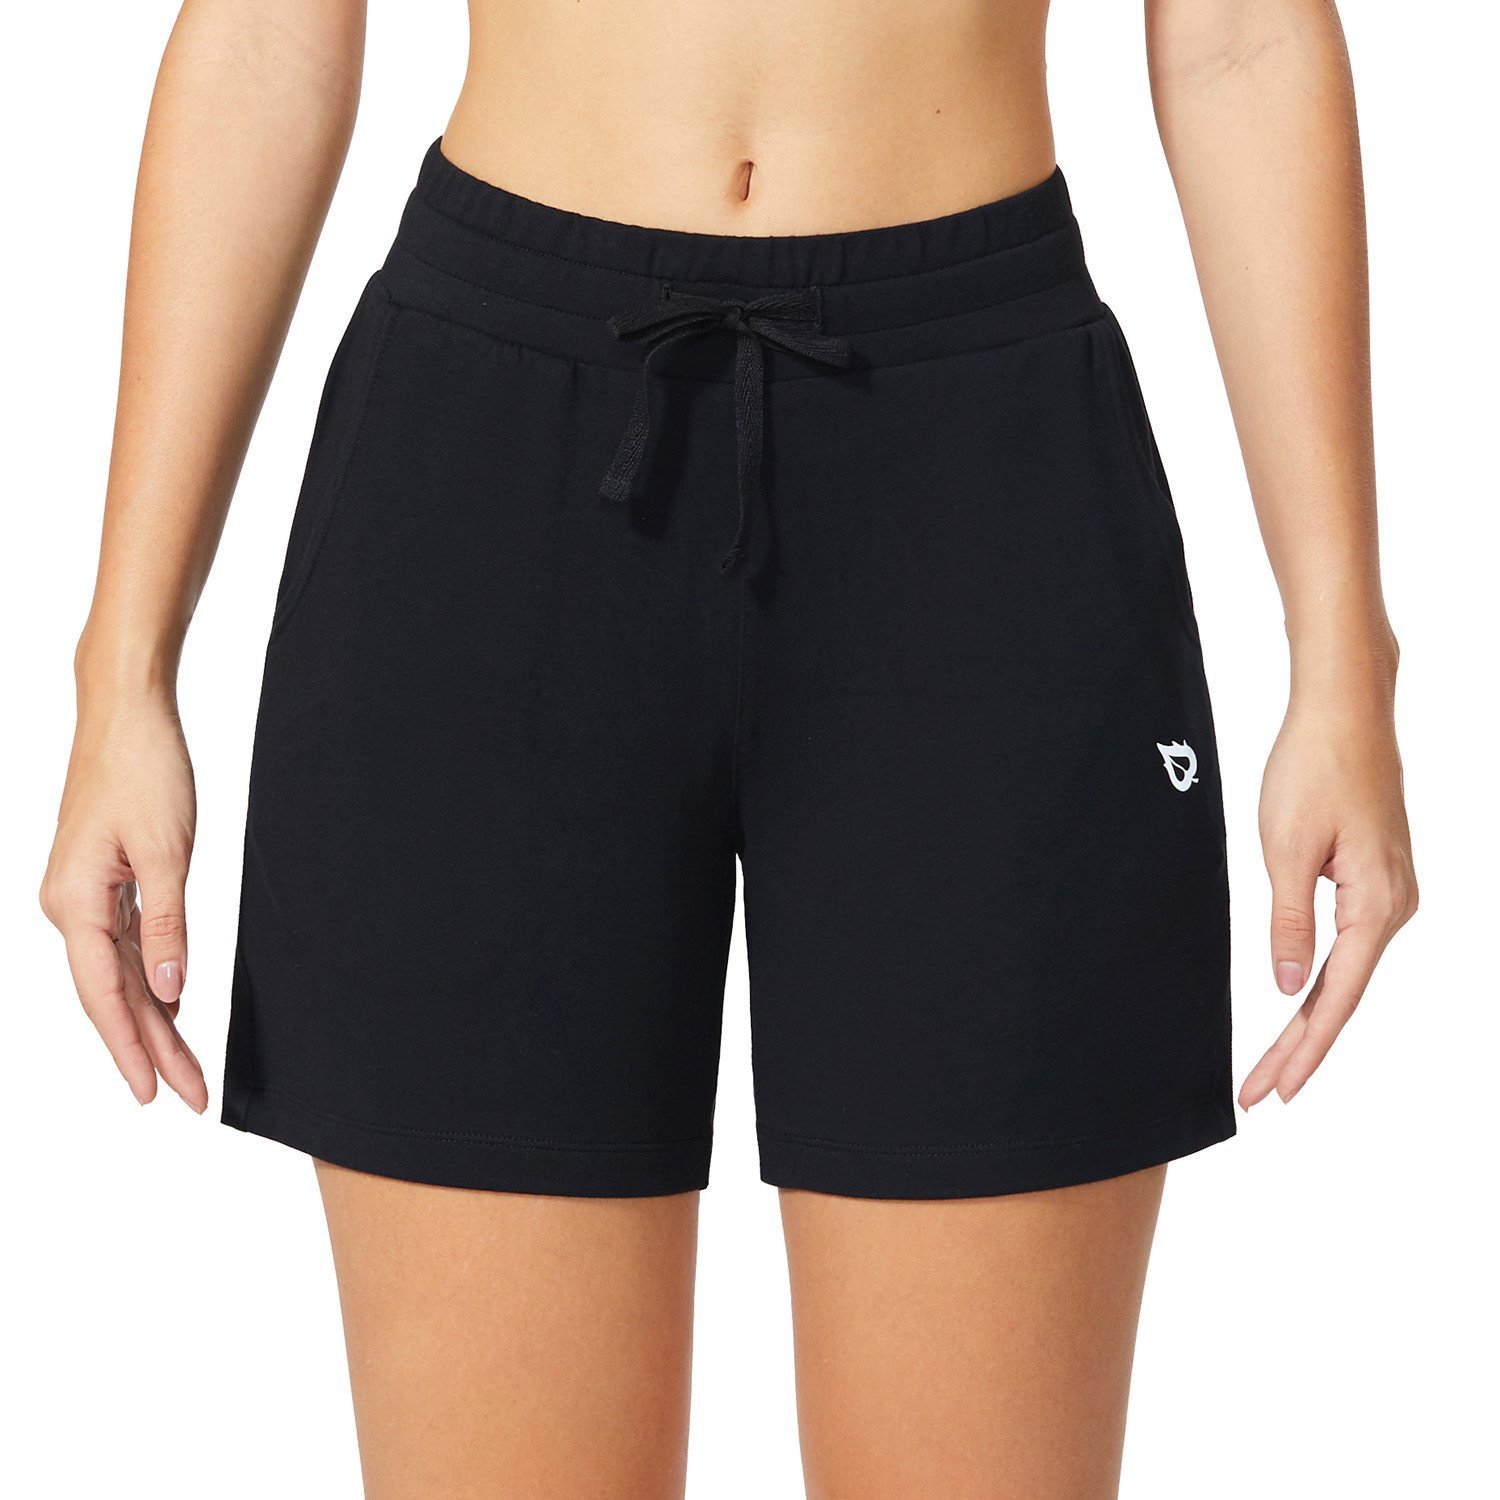 BALEAF Women's High Waisted 5 Running Shorts With 4 Pockets